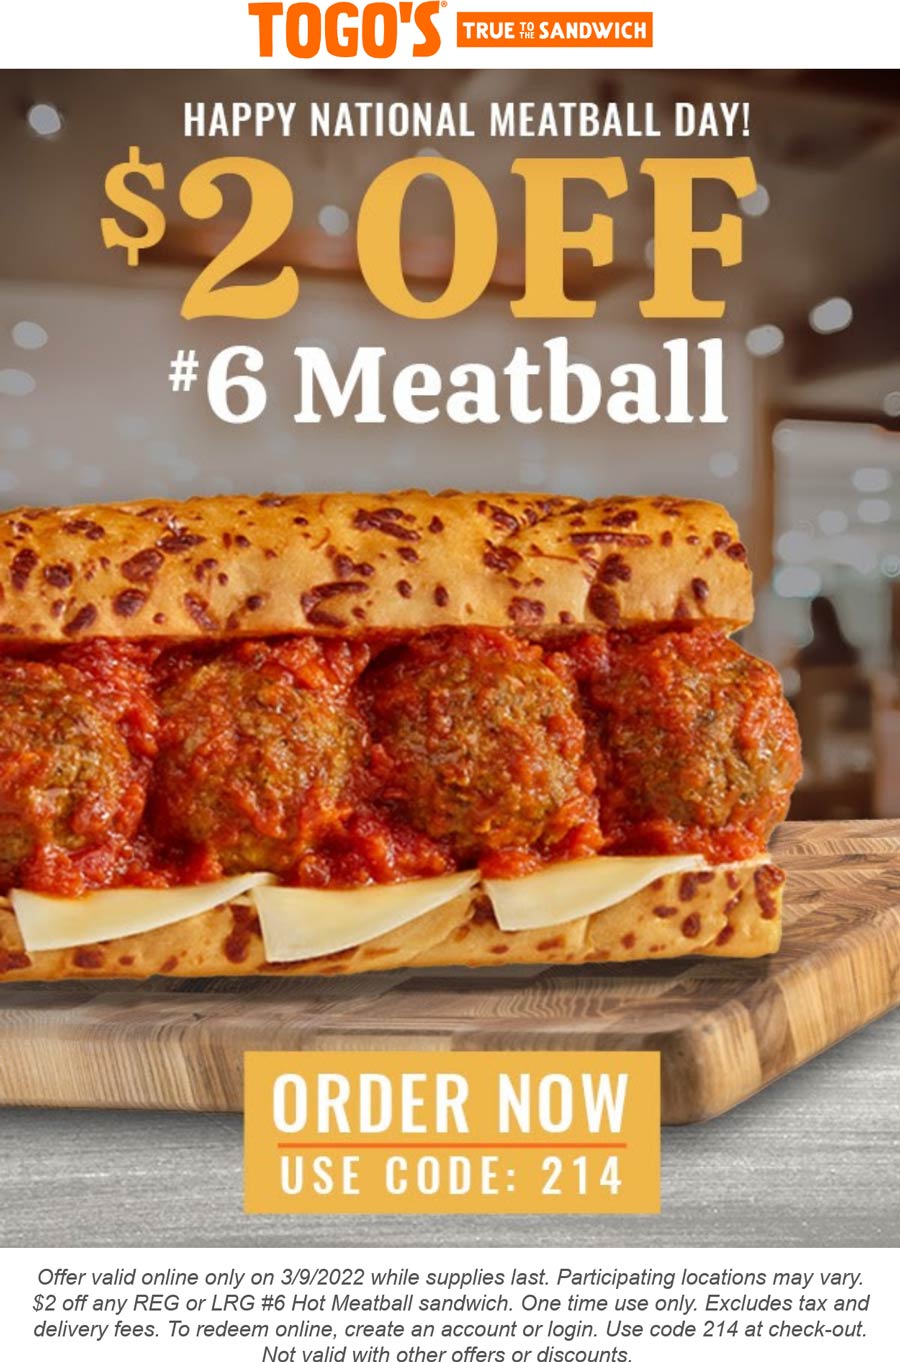 Togos restaurants Coupon  $2 off hot meatball sandwich today at Togos #togos 